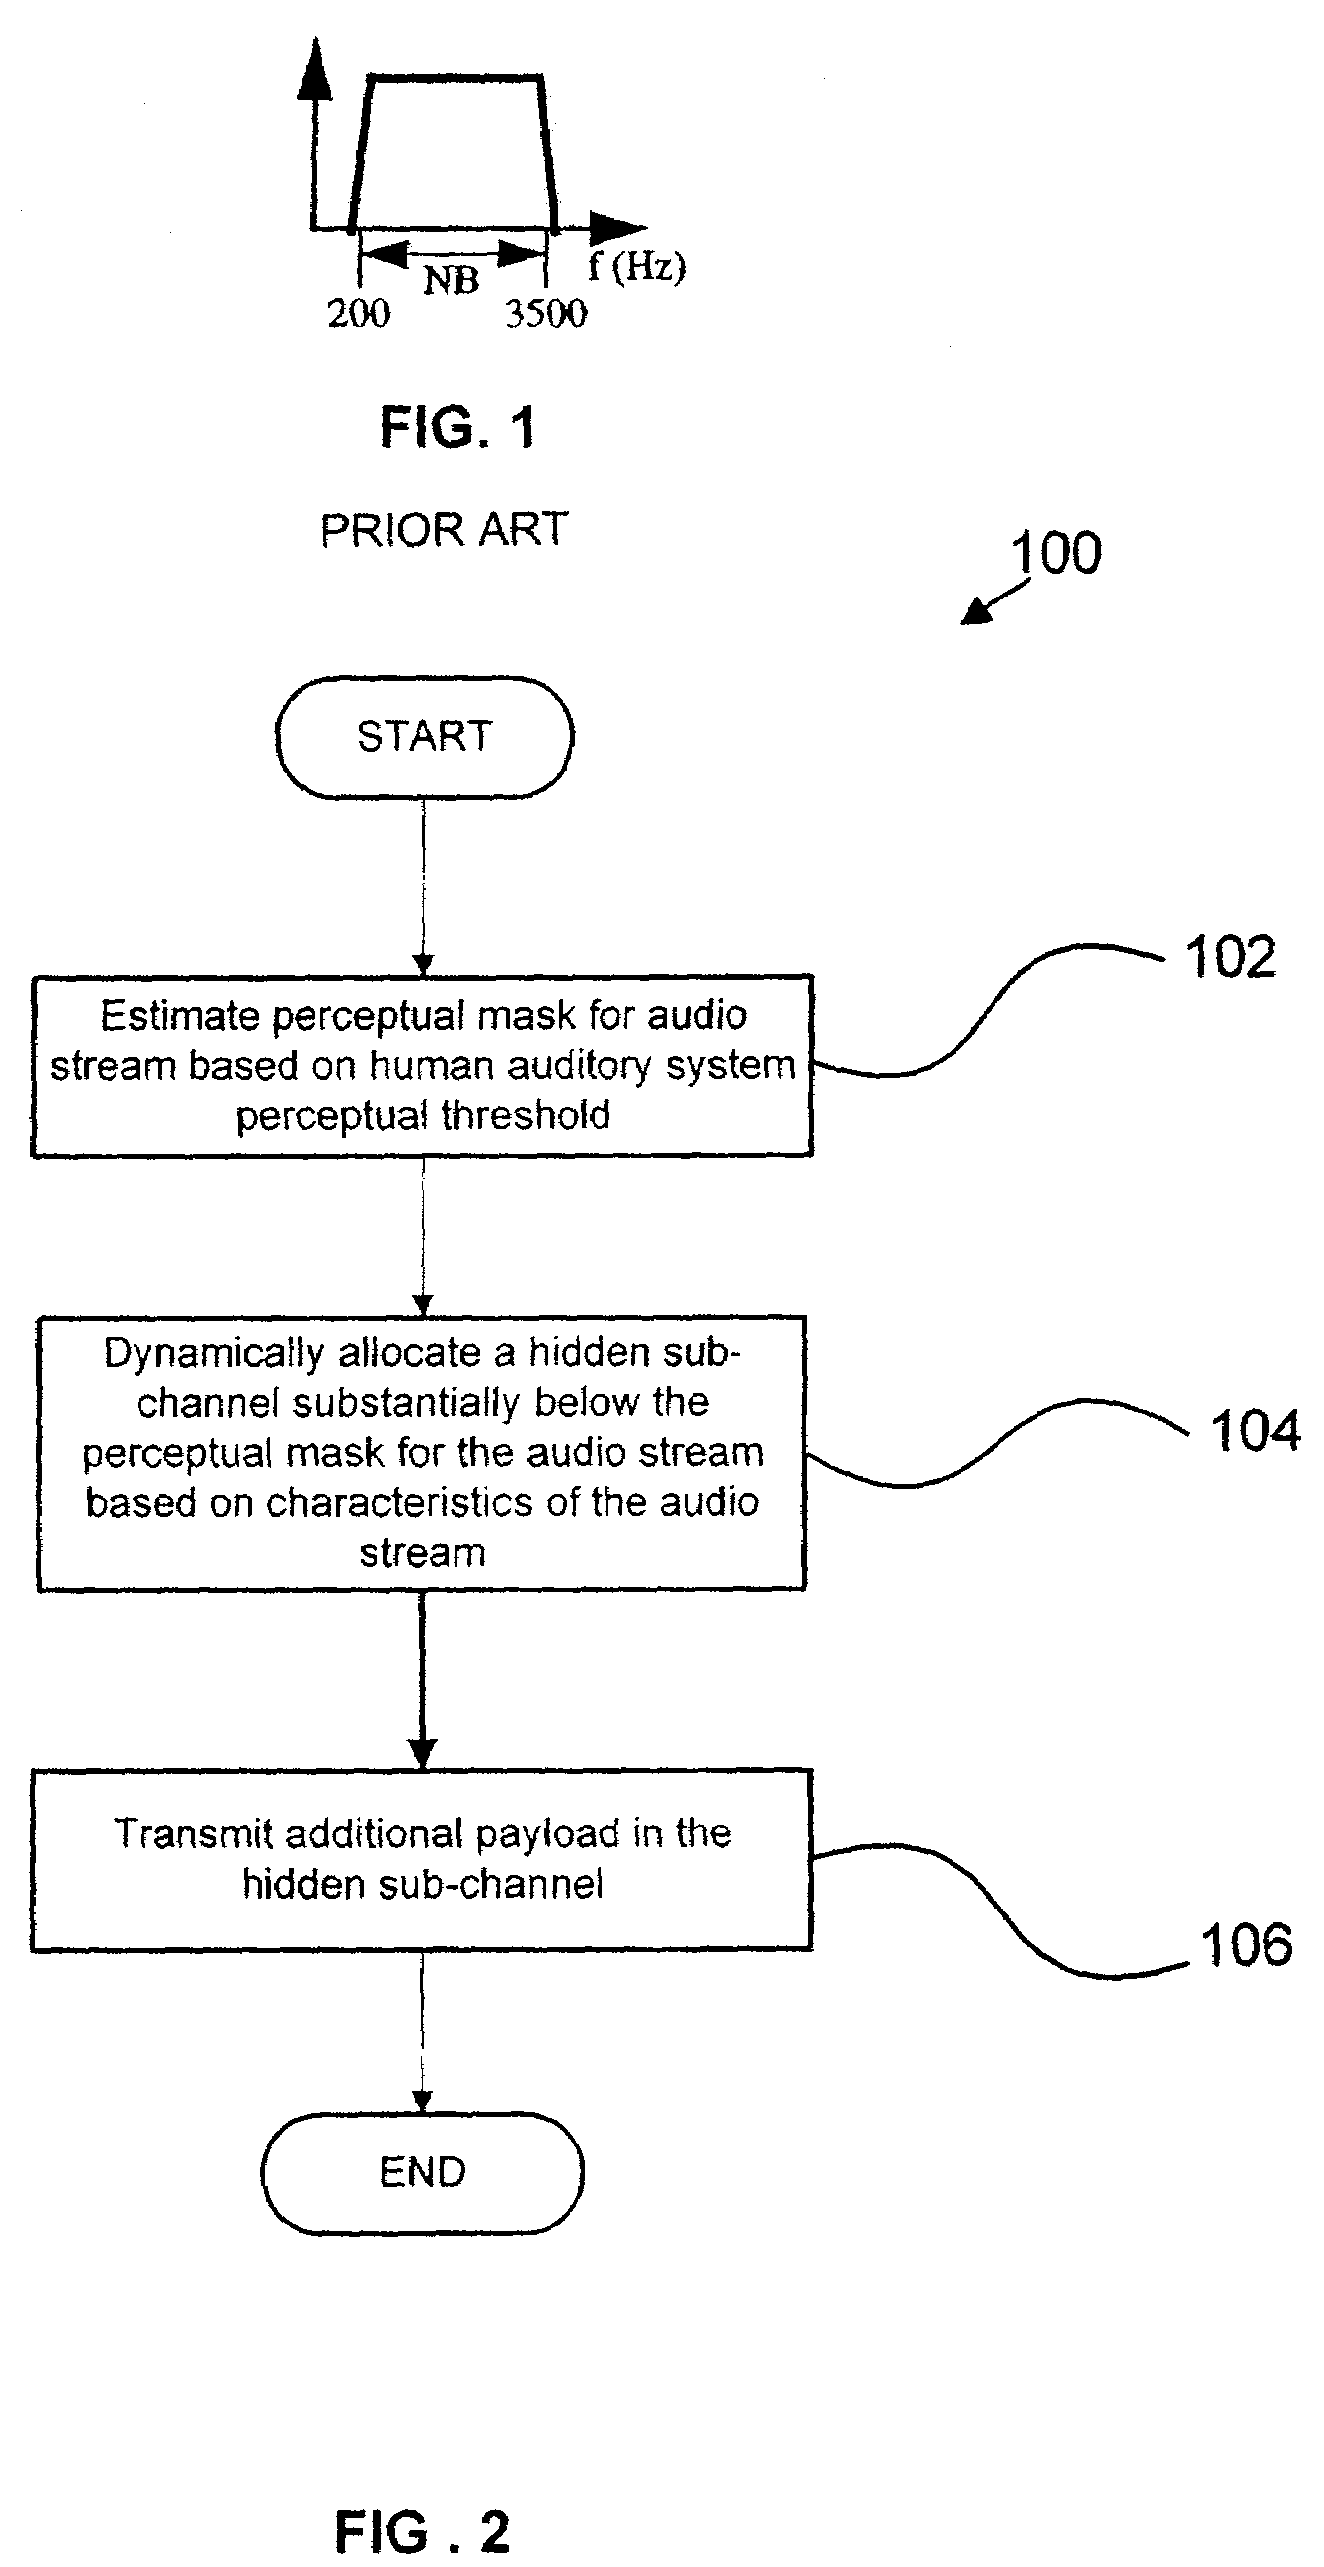 Method and apparatus for transmitting an audio stream having additional payload in a hidden sub-channel